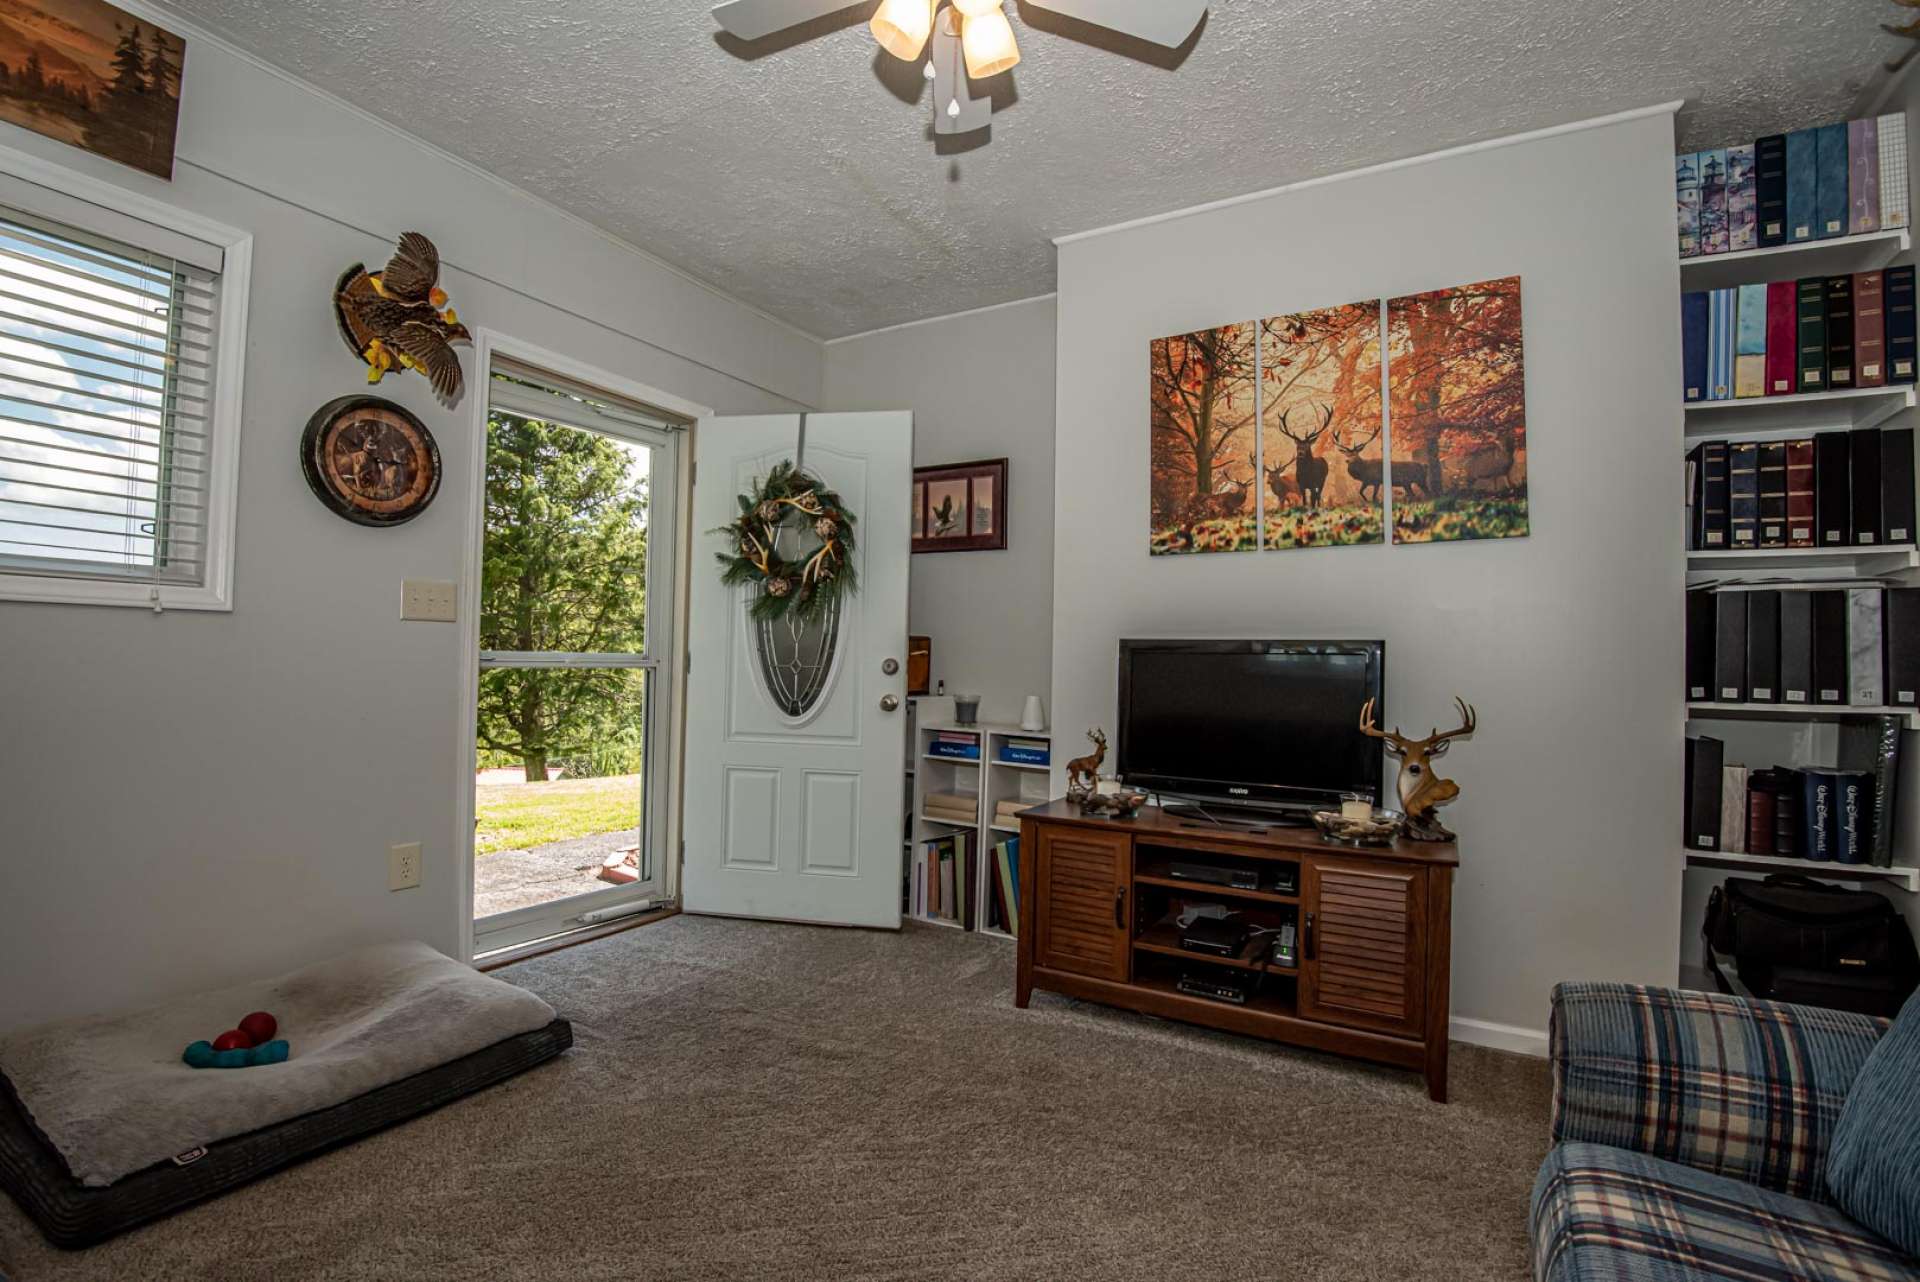 There is also a spacious den/family room that is accessed from outdoors or the dining room.